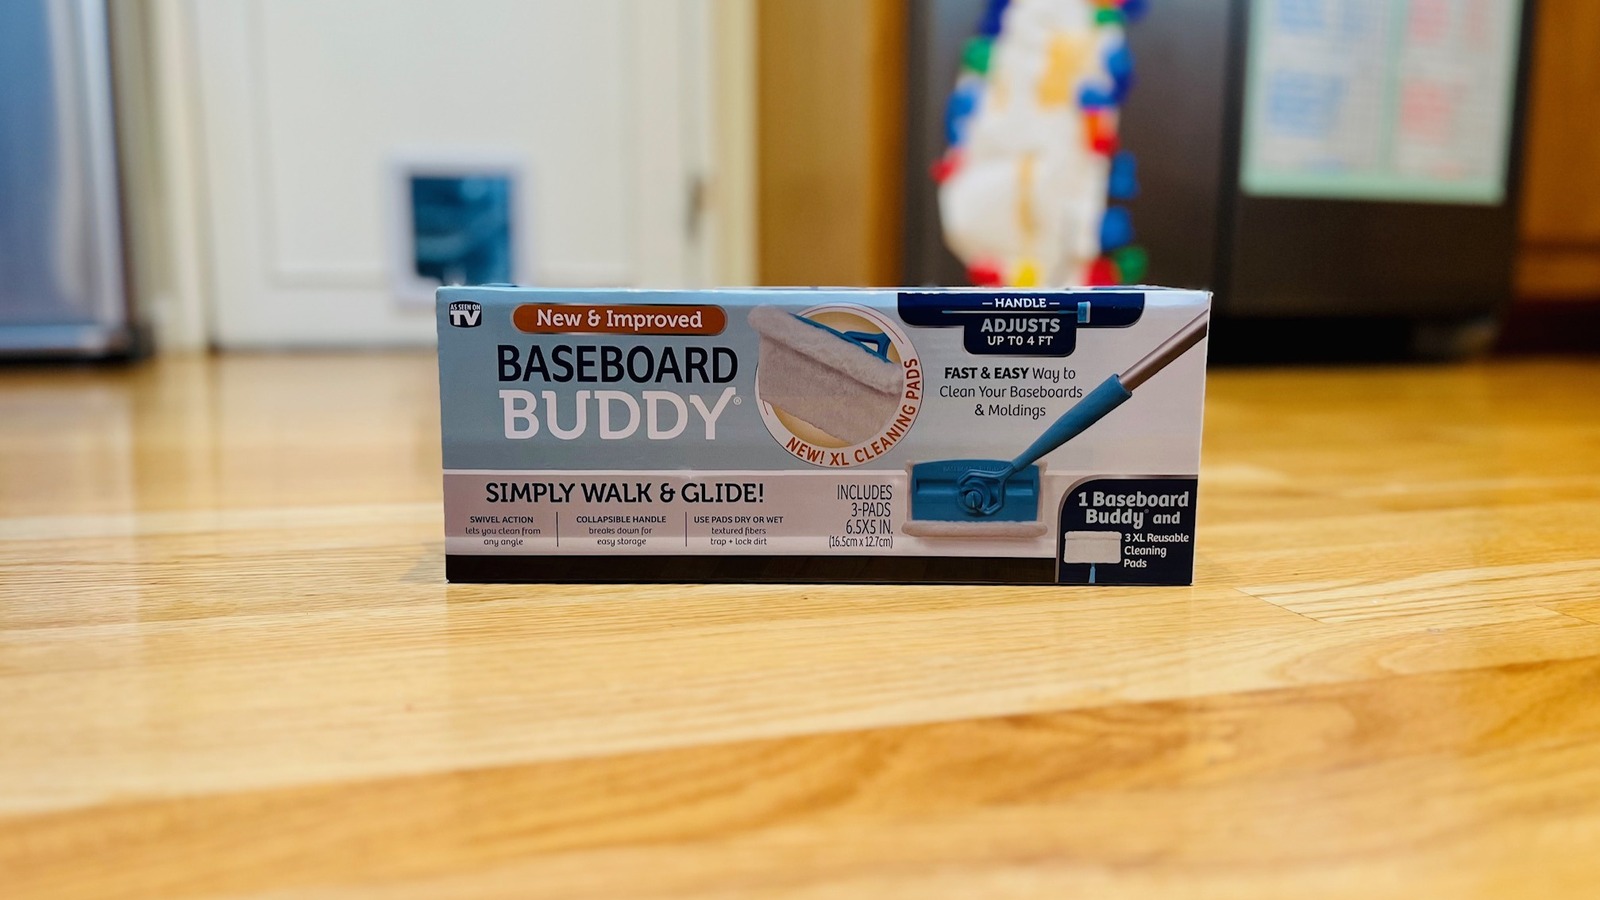 We Tried The As-Seen-On-TV BaseBoard Buddy And It Wasn't As